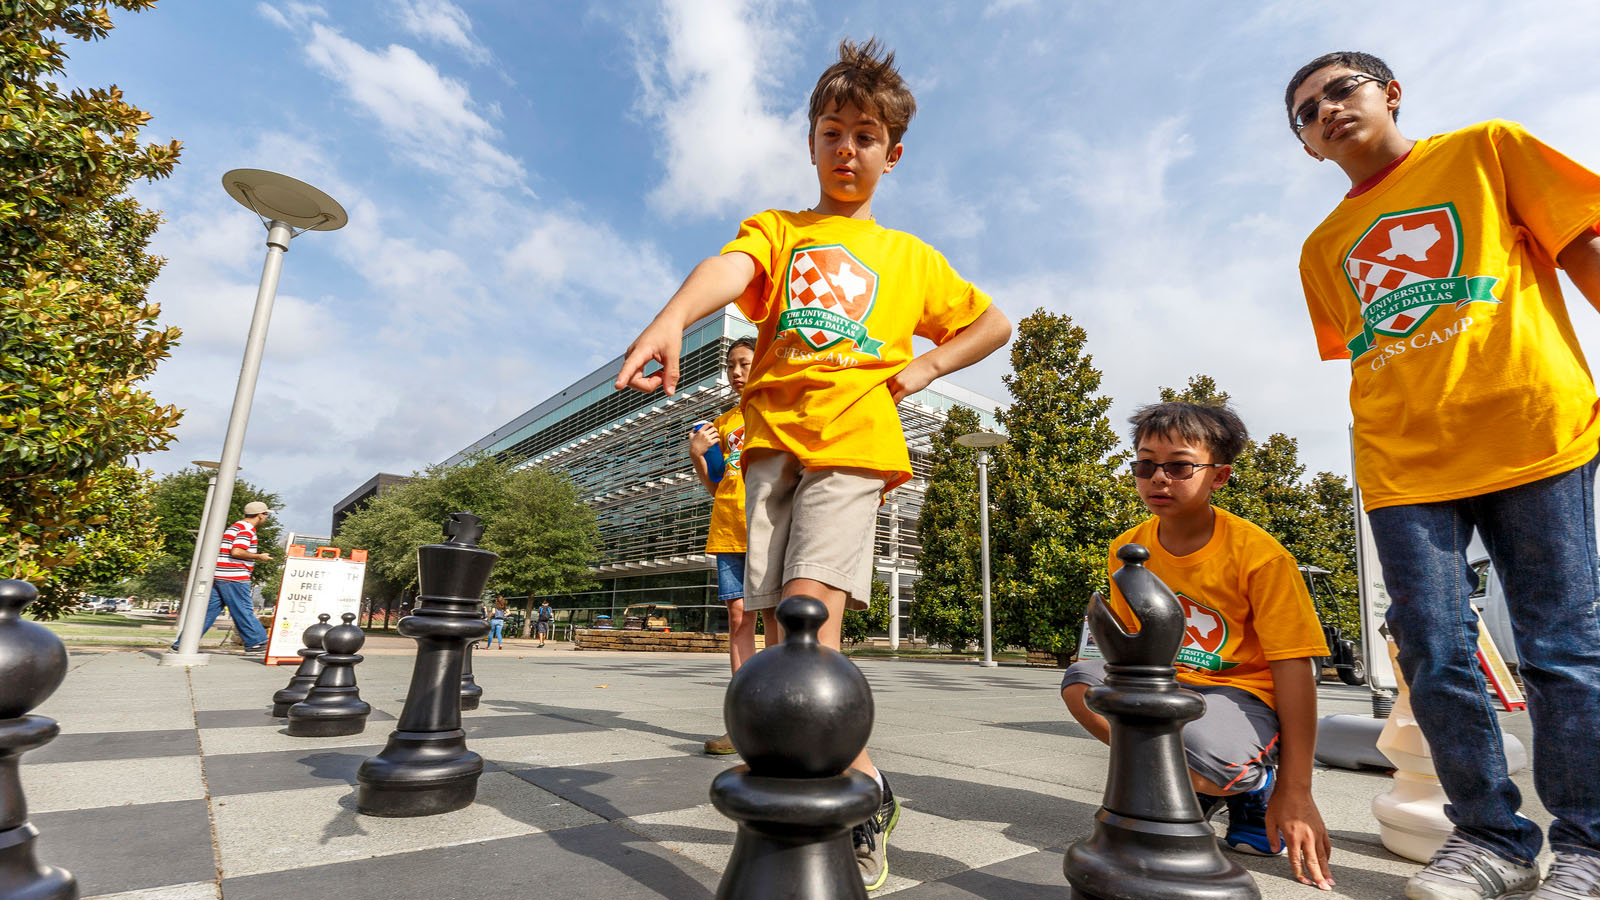 Children playing with life-size chess pieces at Chess Plaza